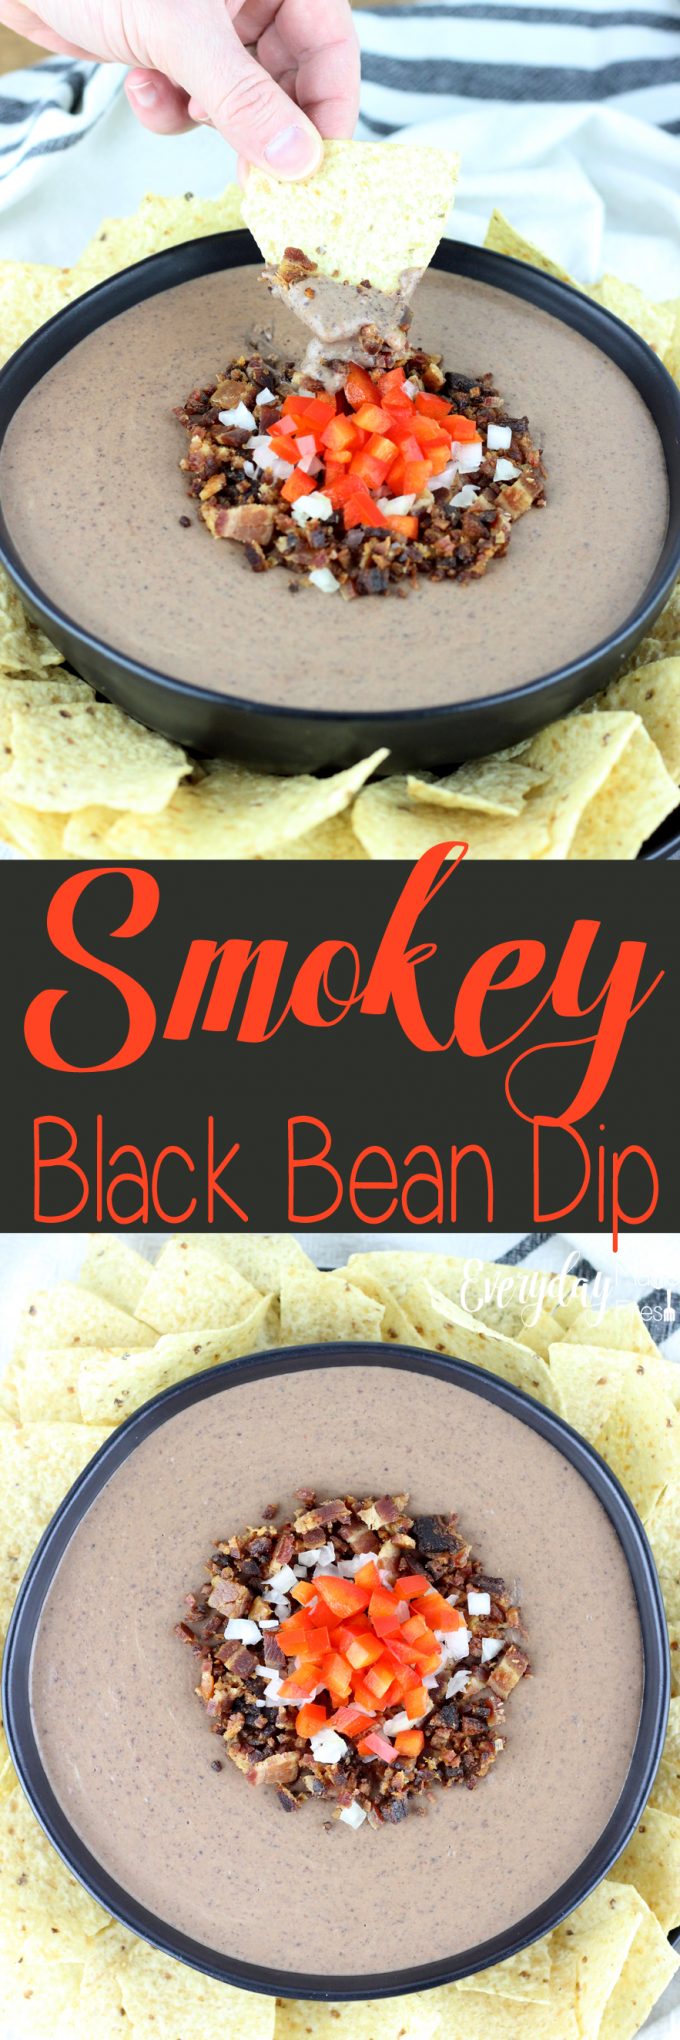 This Smokey Black Bean Dip is simple to make, and only requires 10 ingredients! It's creamy, smokey, and spicy, everything you want in a black bean dip! This dip is made for holidays, parties and tailgating. | EverydayMadeFresh.com